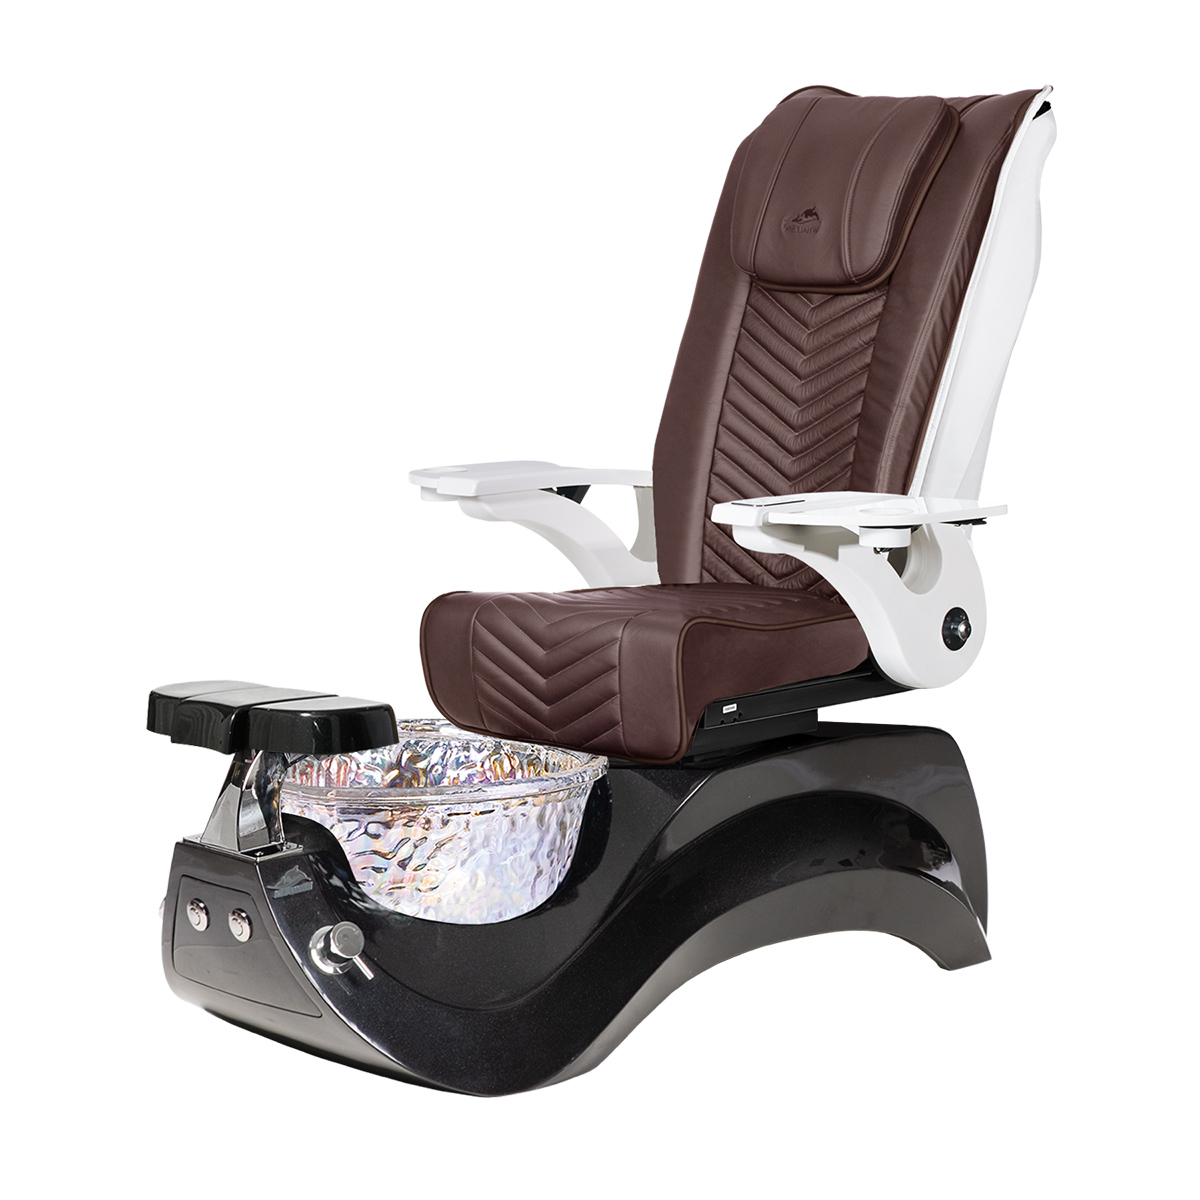 Alden Crystal Pedicure Chair Package Deal